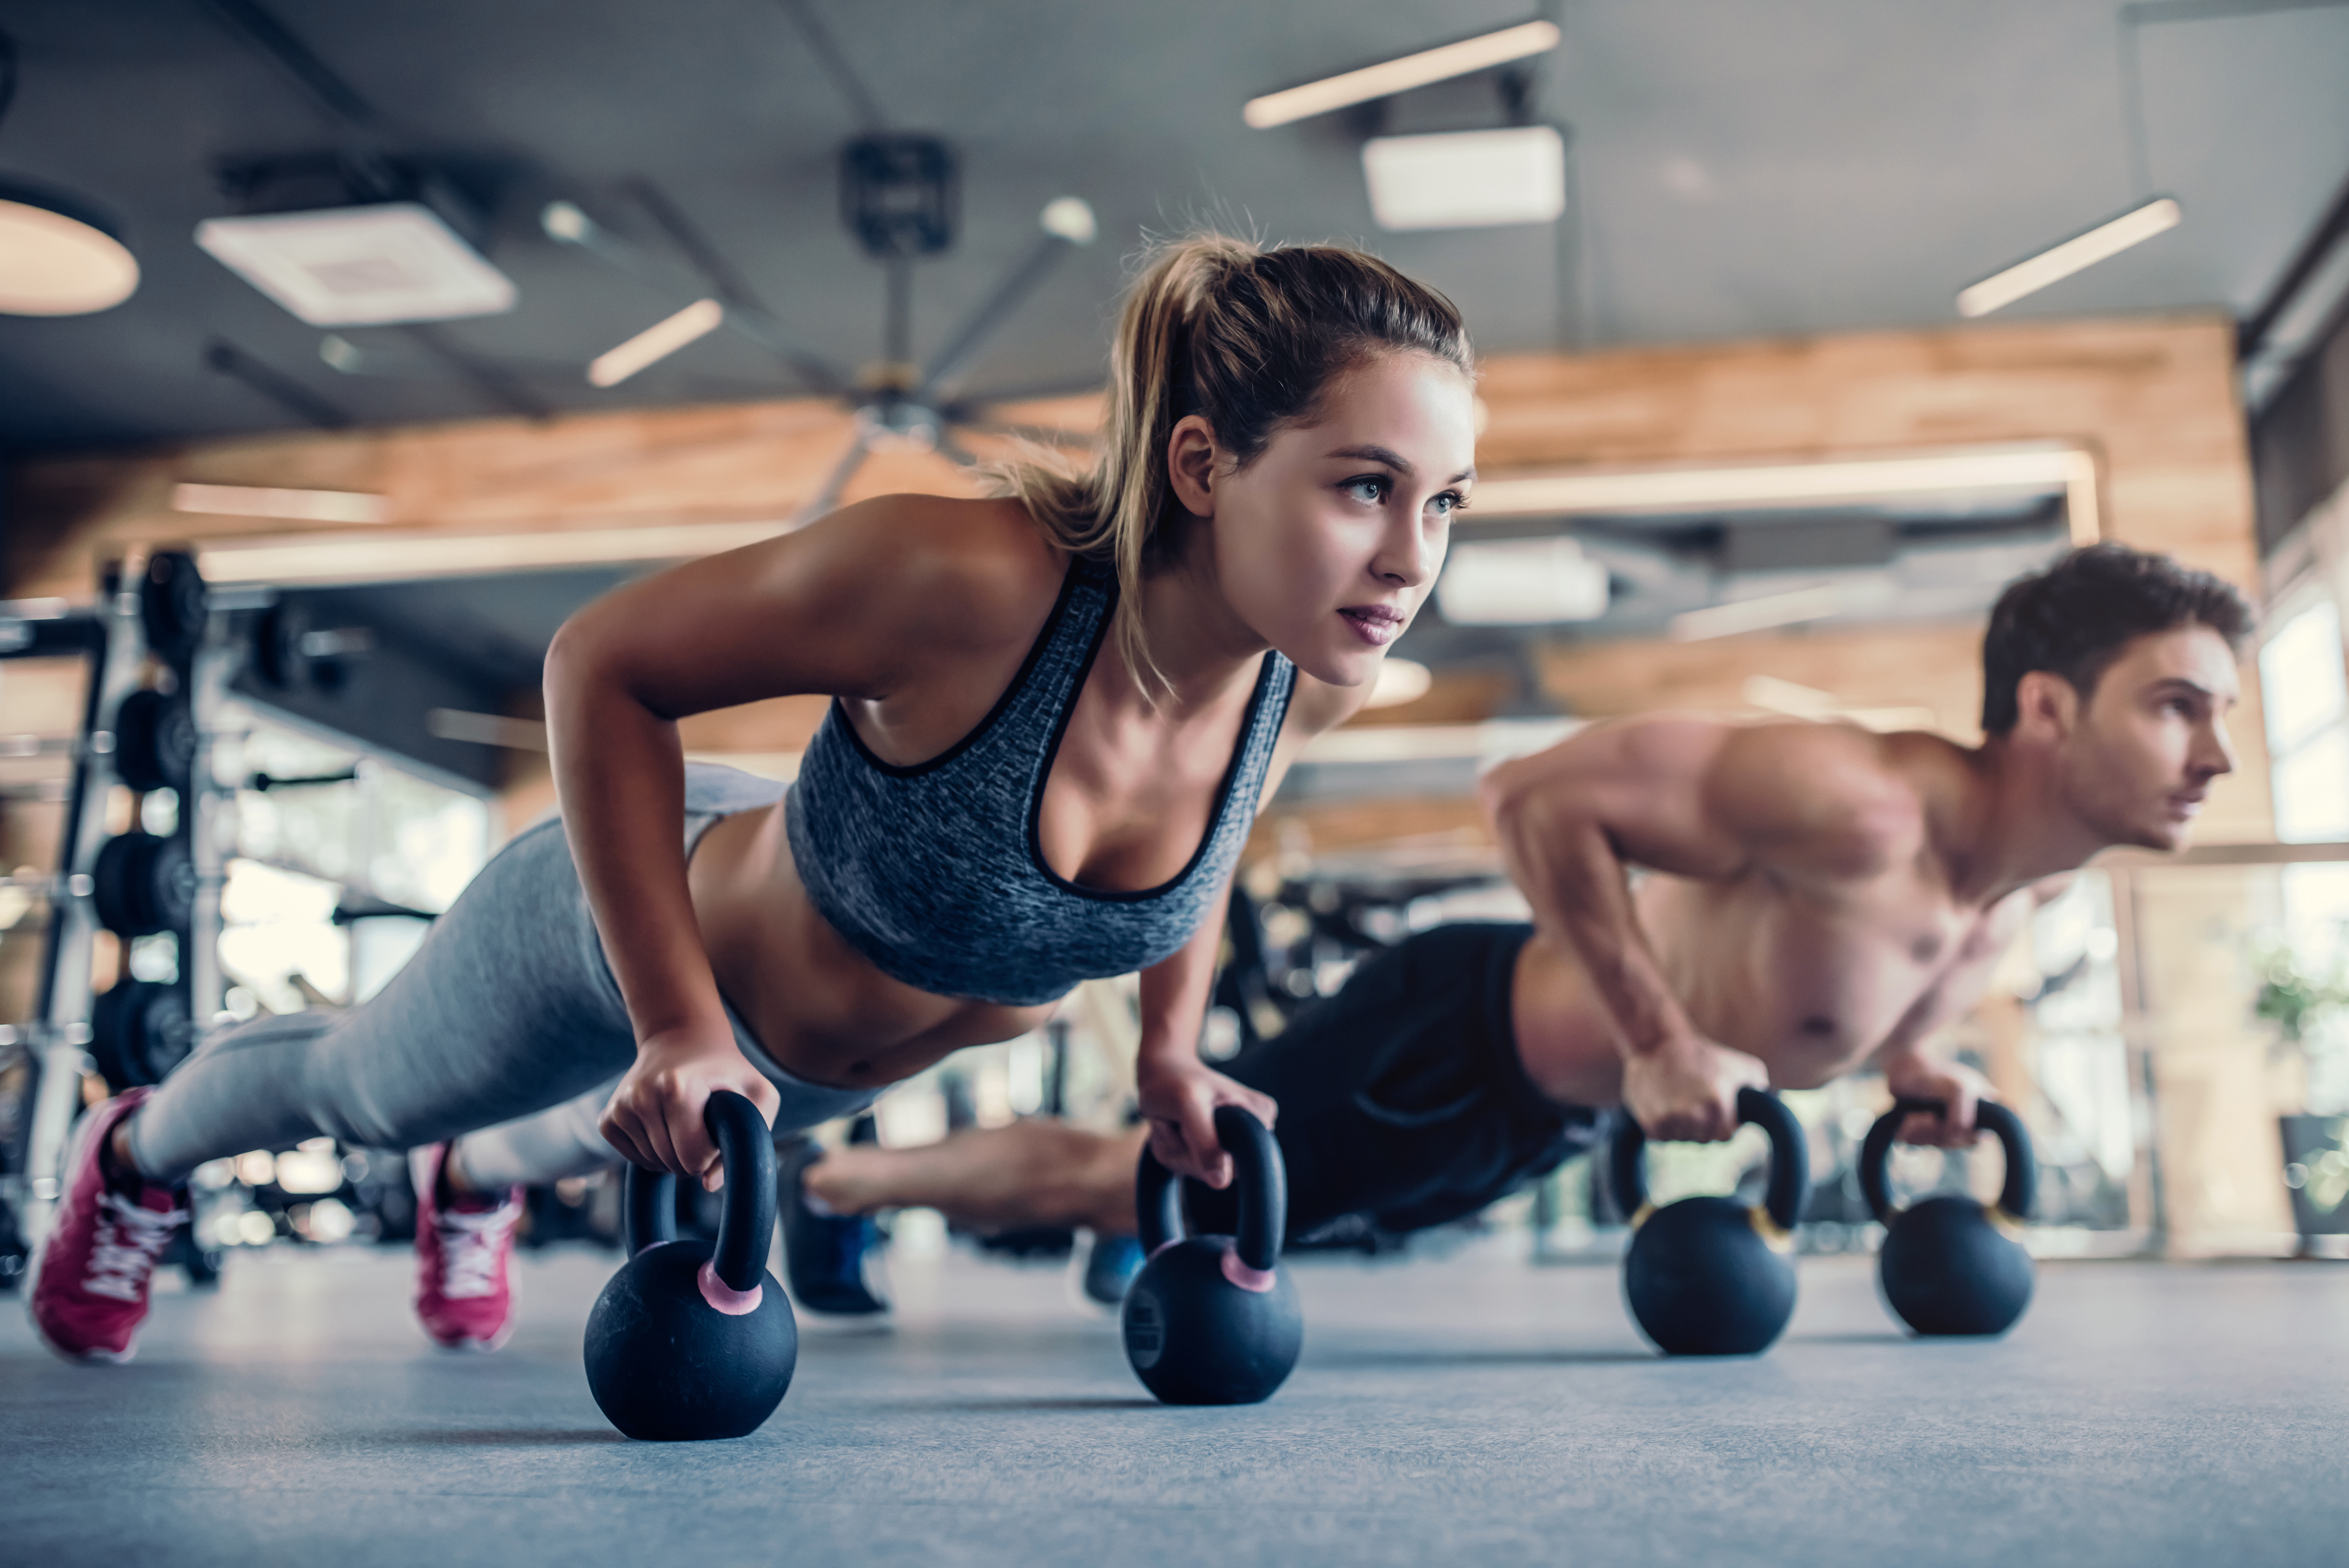 A man and woman working out at a gym | Source: Shutterstock